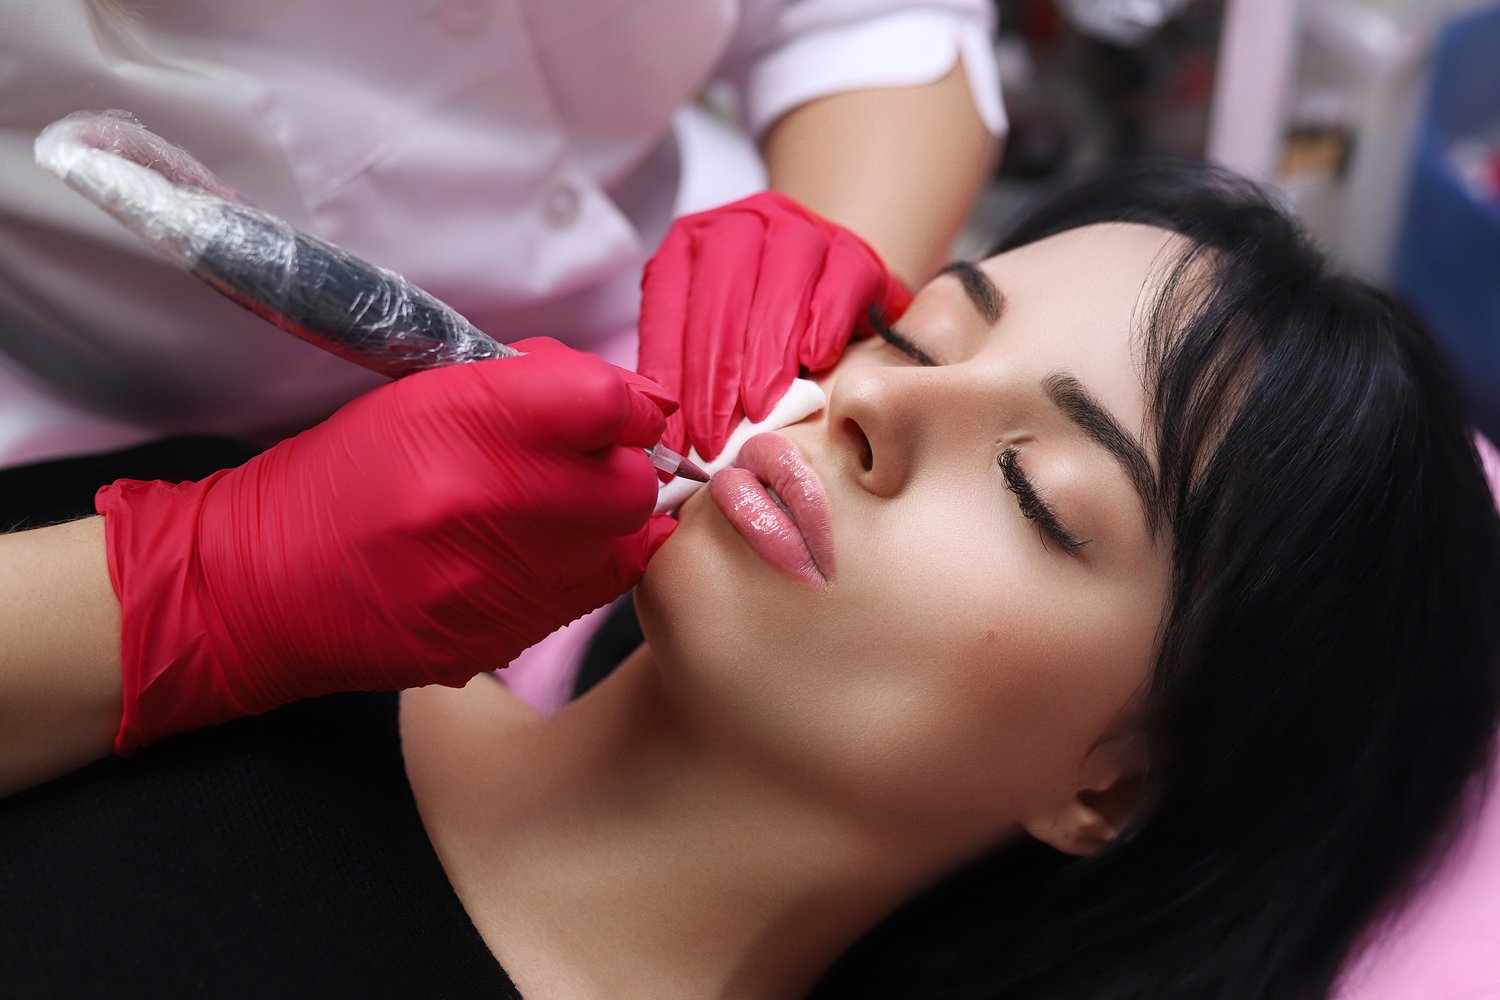 Healthy Spa: Young Beautiful Woman Having Permanent Make-up (Tattoo) on her Lips. Close-up